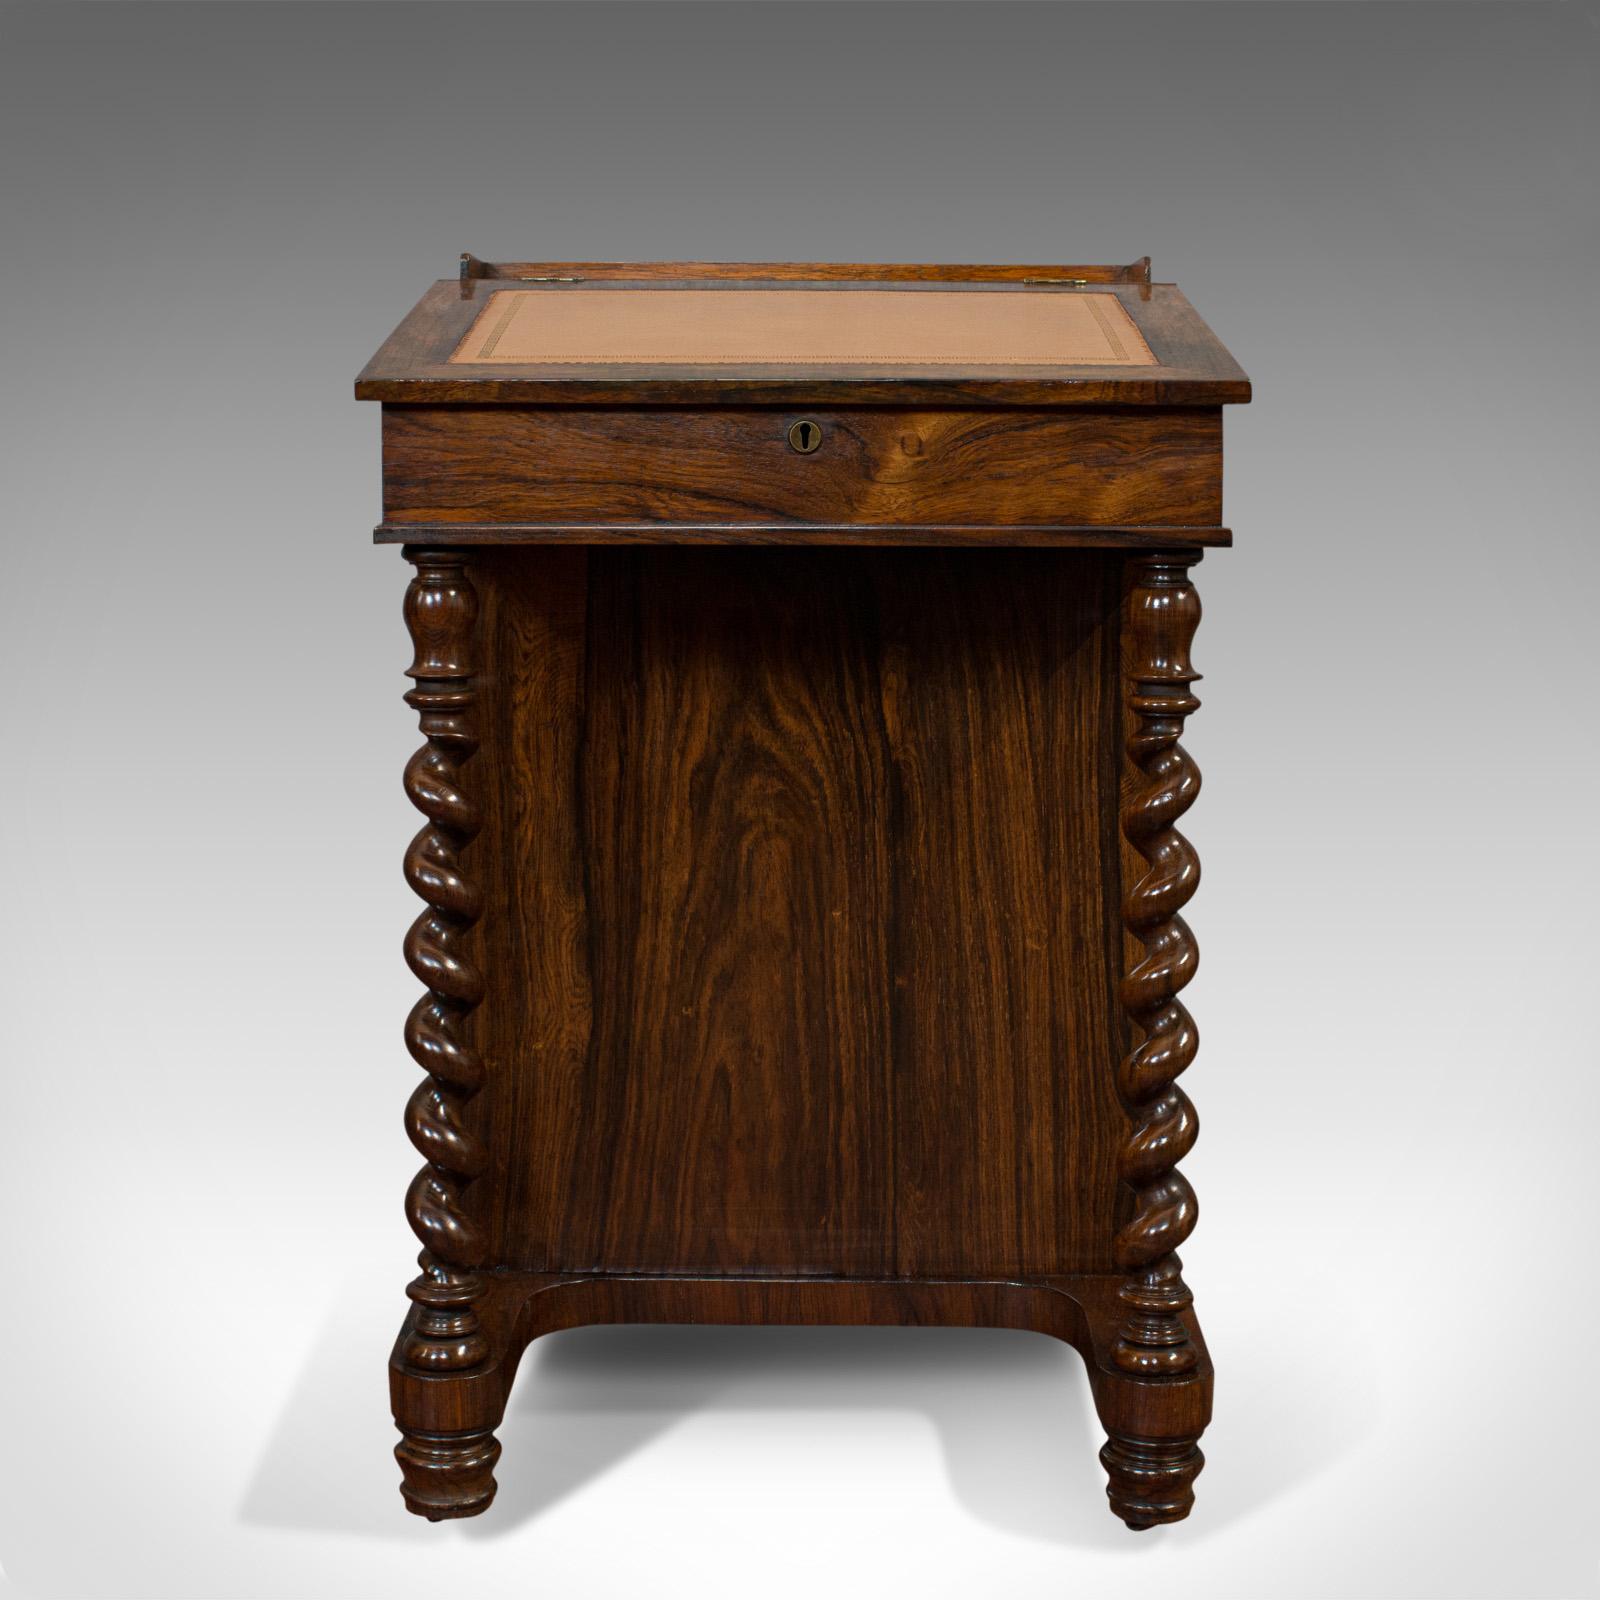 This is an antique Davenport. An English, rosewood and satinwood writing desk, dating to the Victorian period, circa 1880.

Dashing Victorian Davenport
Displays a desirable aged patina
Splendid rosewood offers fine grain interest and rich russet